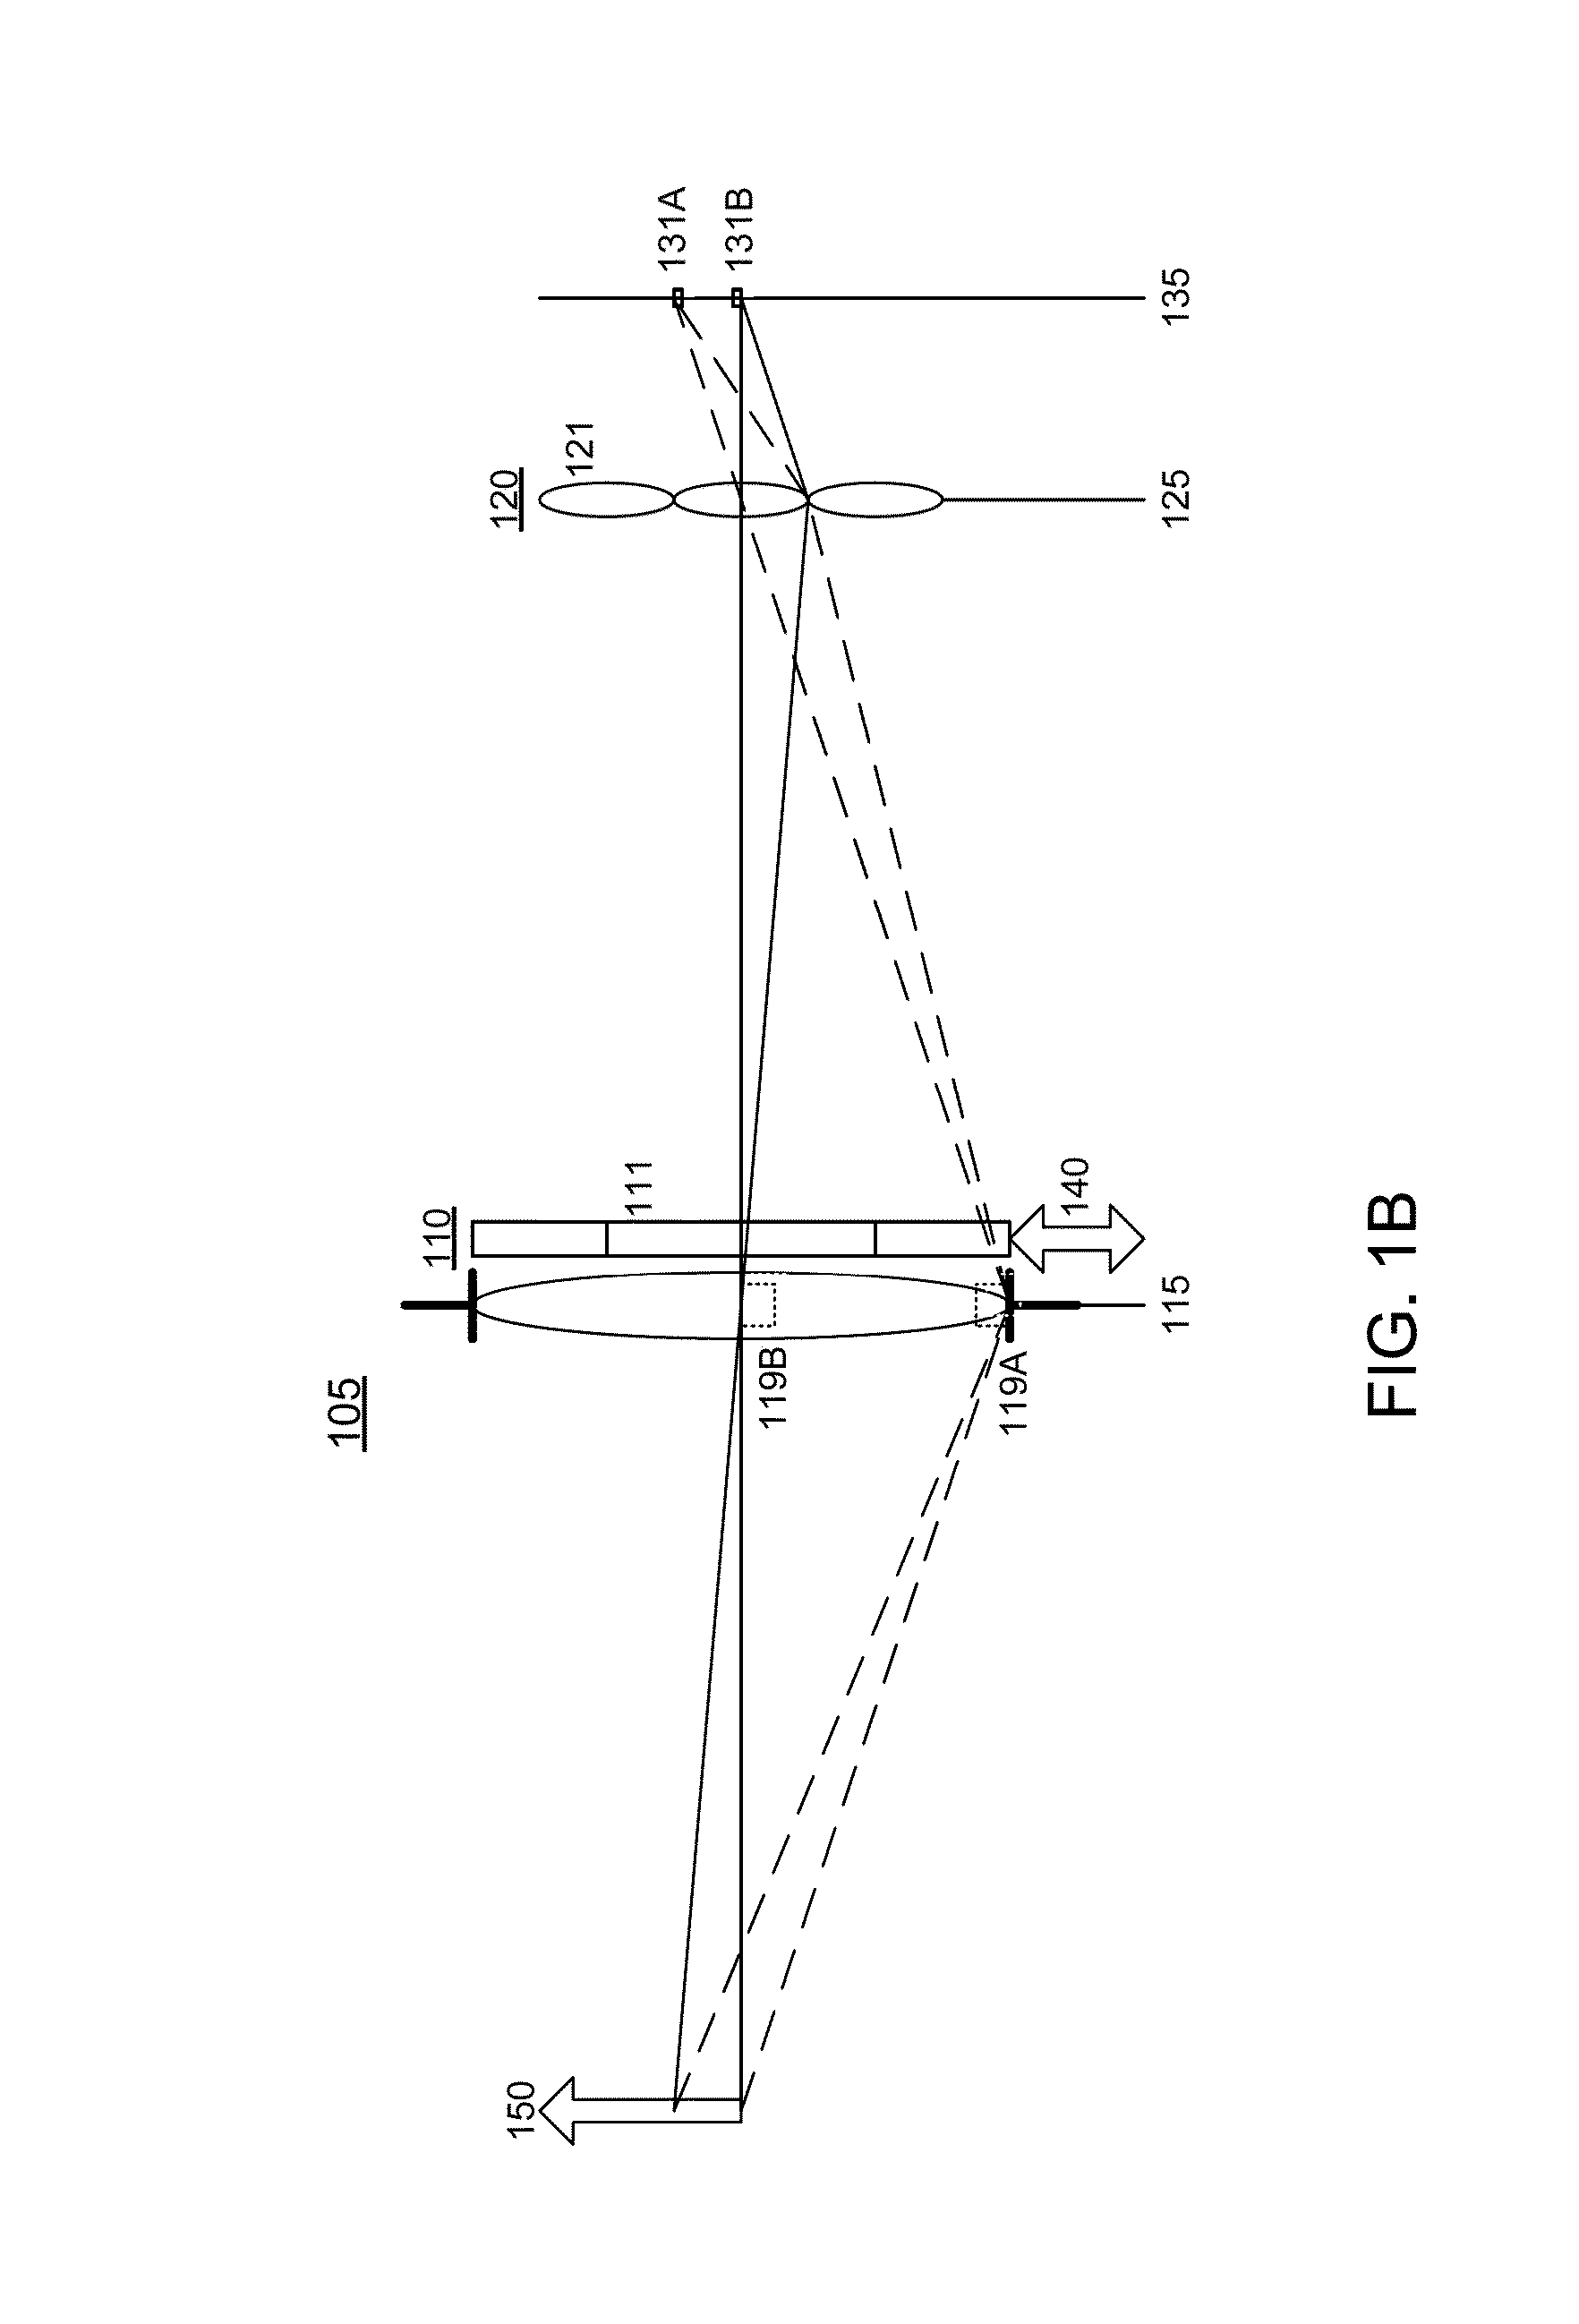 Dynamic Adjustment of Multimode Lightfield Imaging System Using Exposure Condition and Filter Position